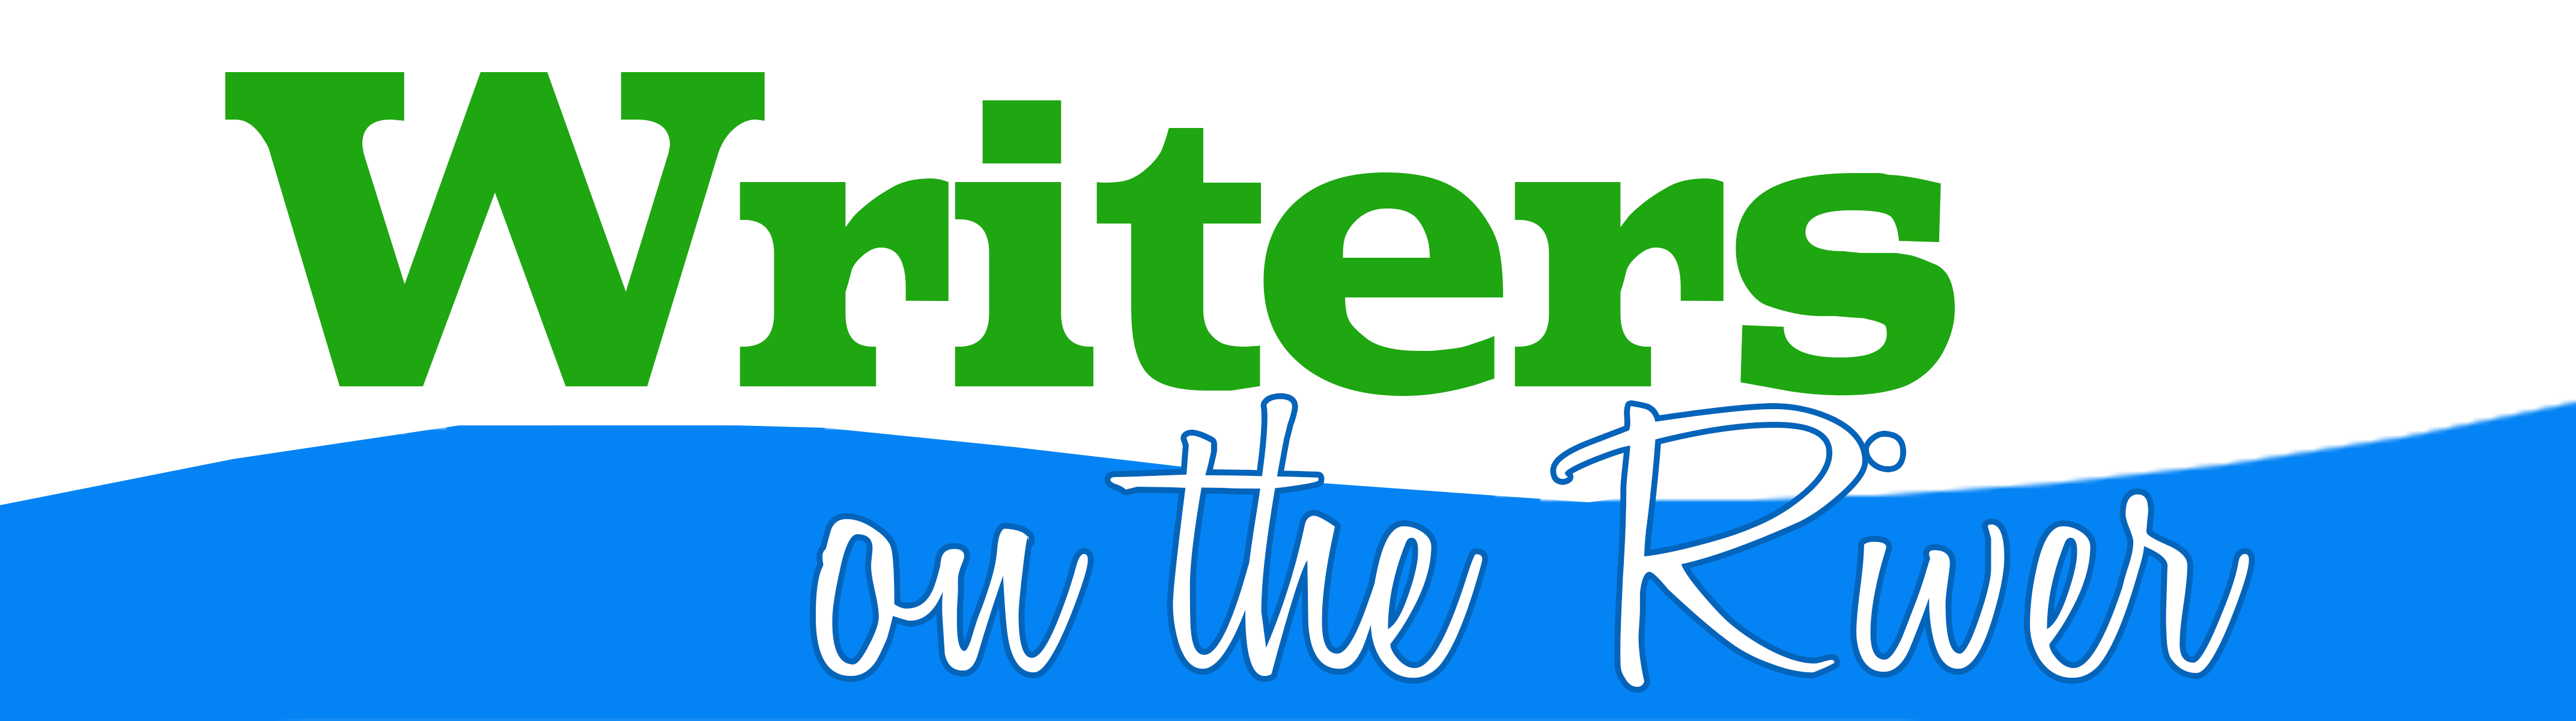 Writers on the River logo banner